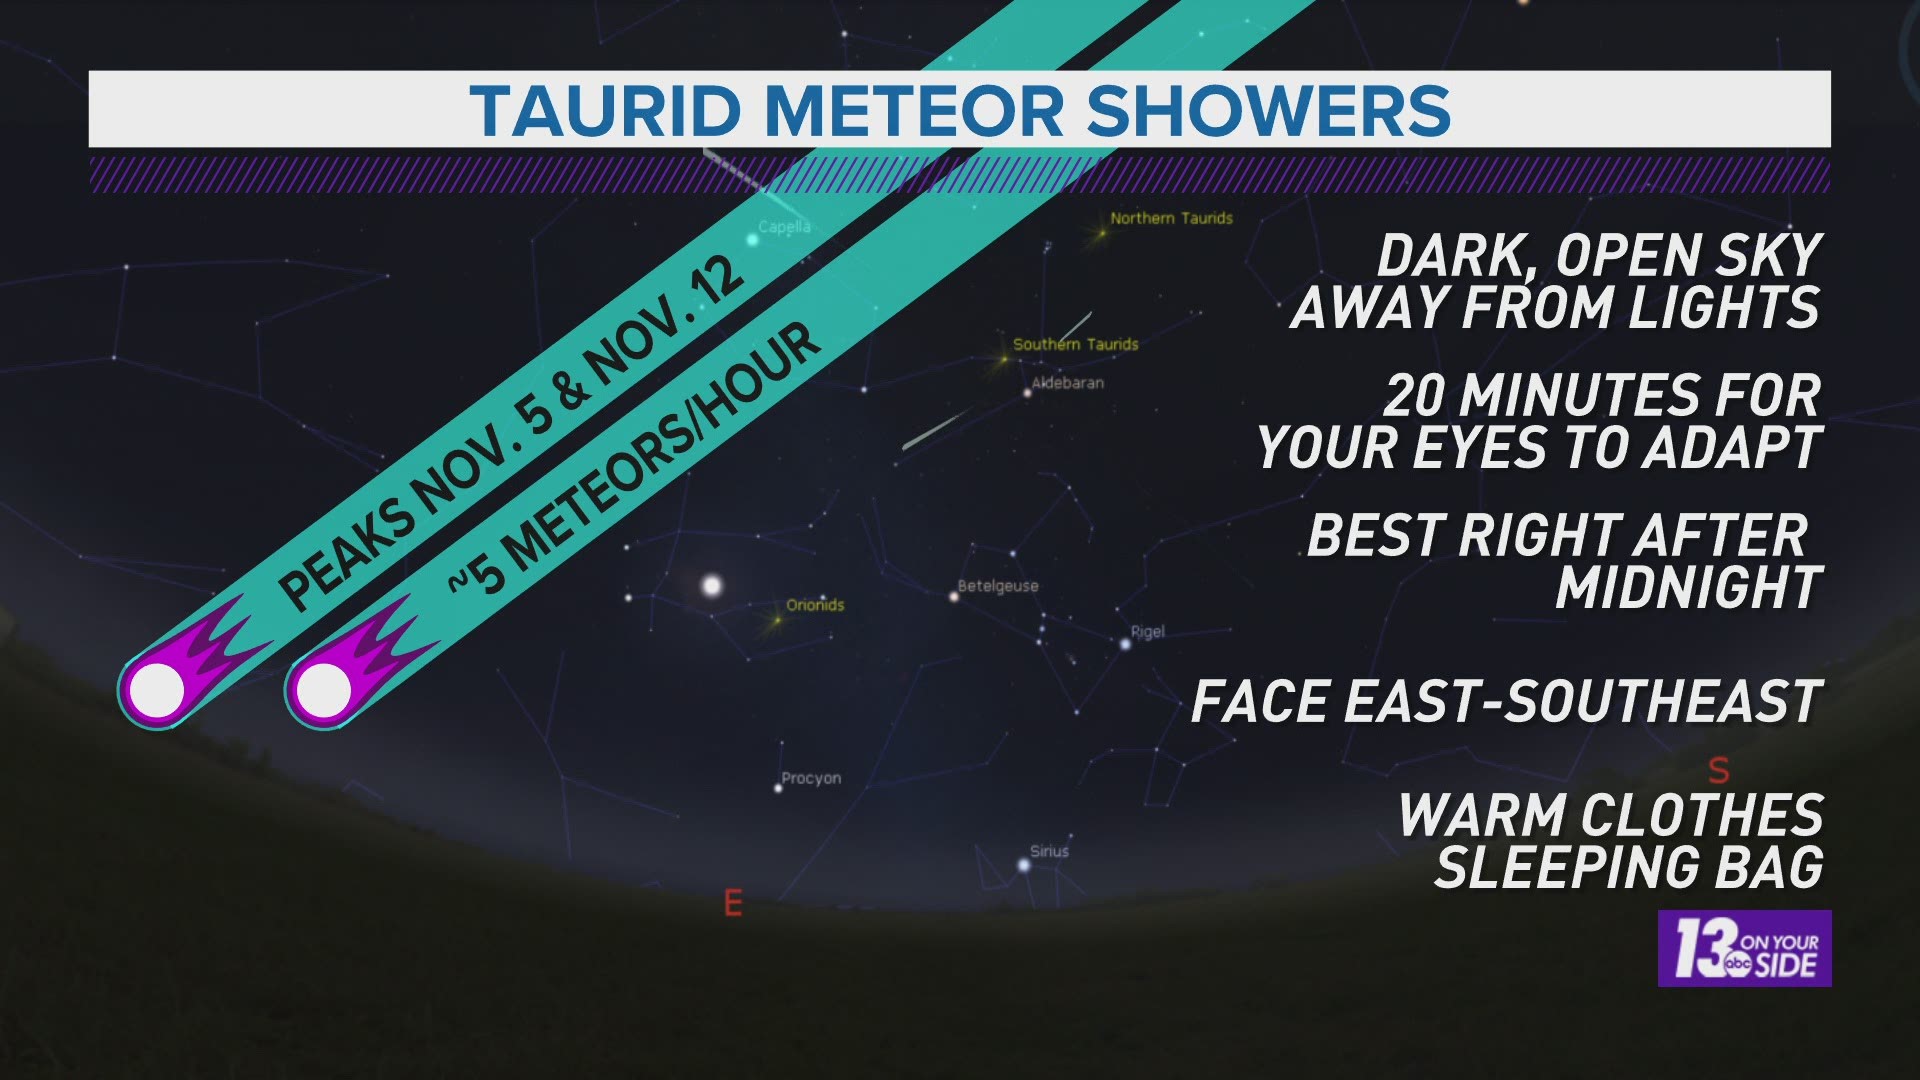 Southern Taurid Meteor Shower Peaks Overnight!